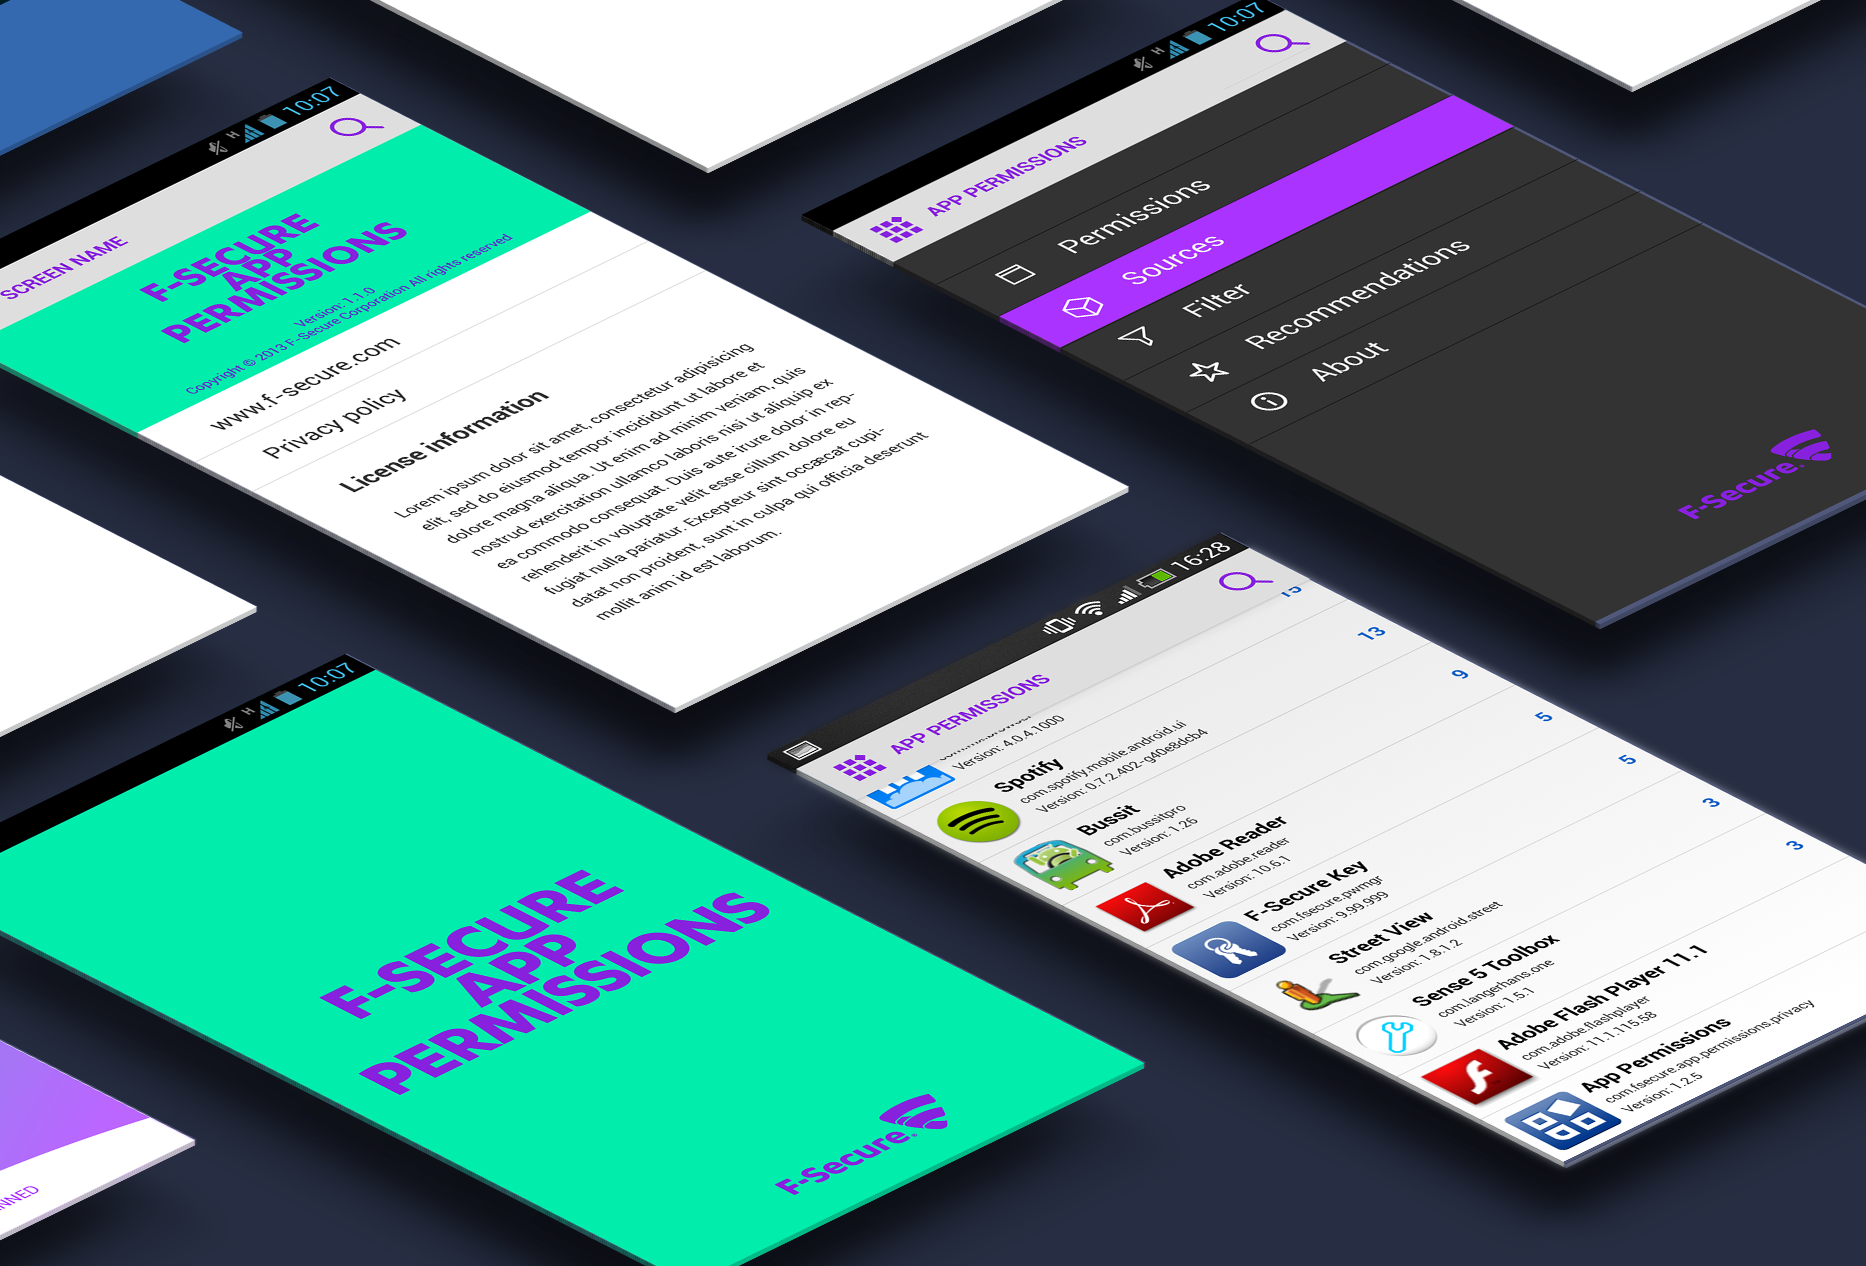 a sketch features mobile application design based on material design system